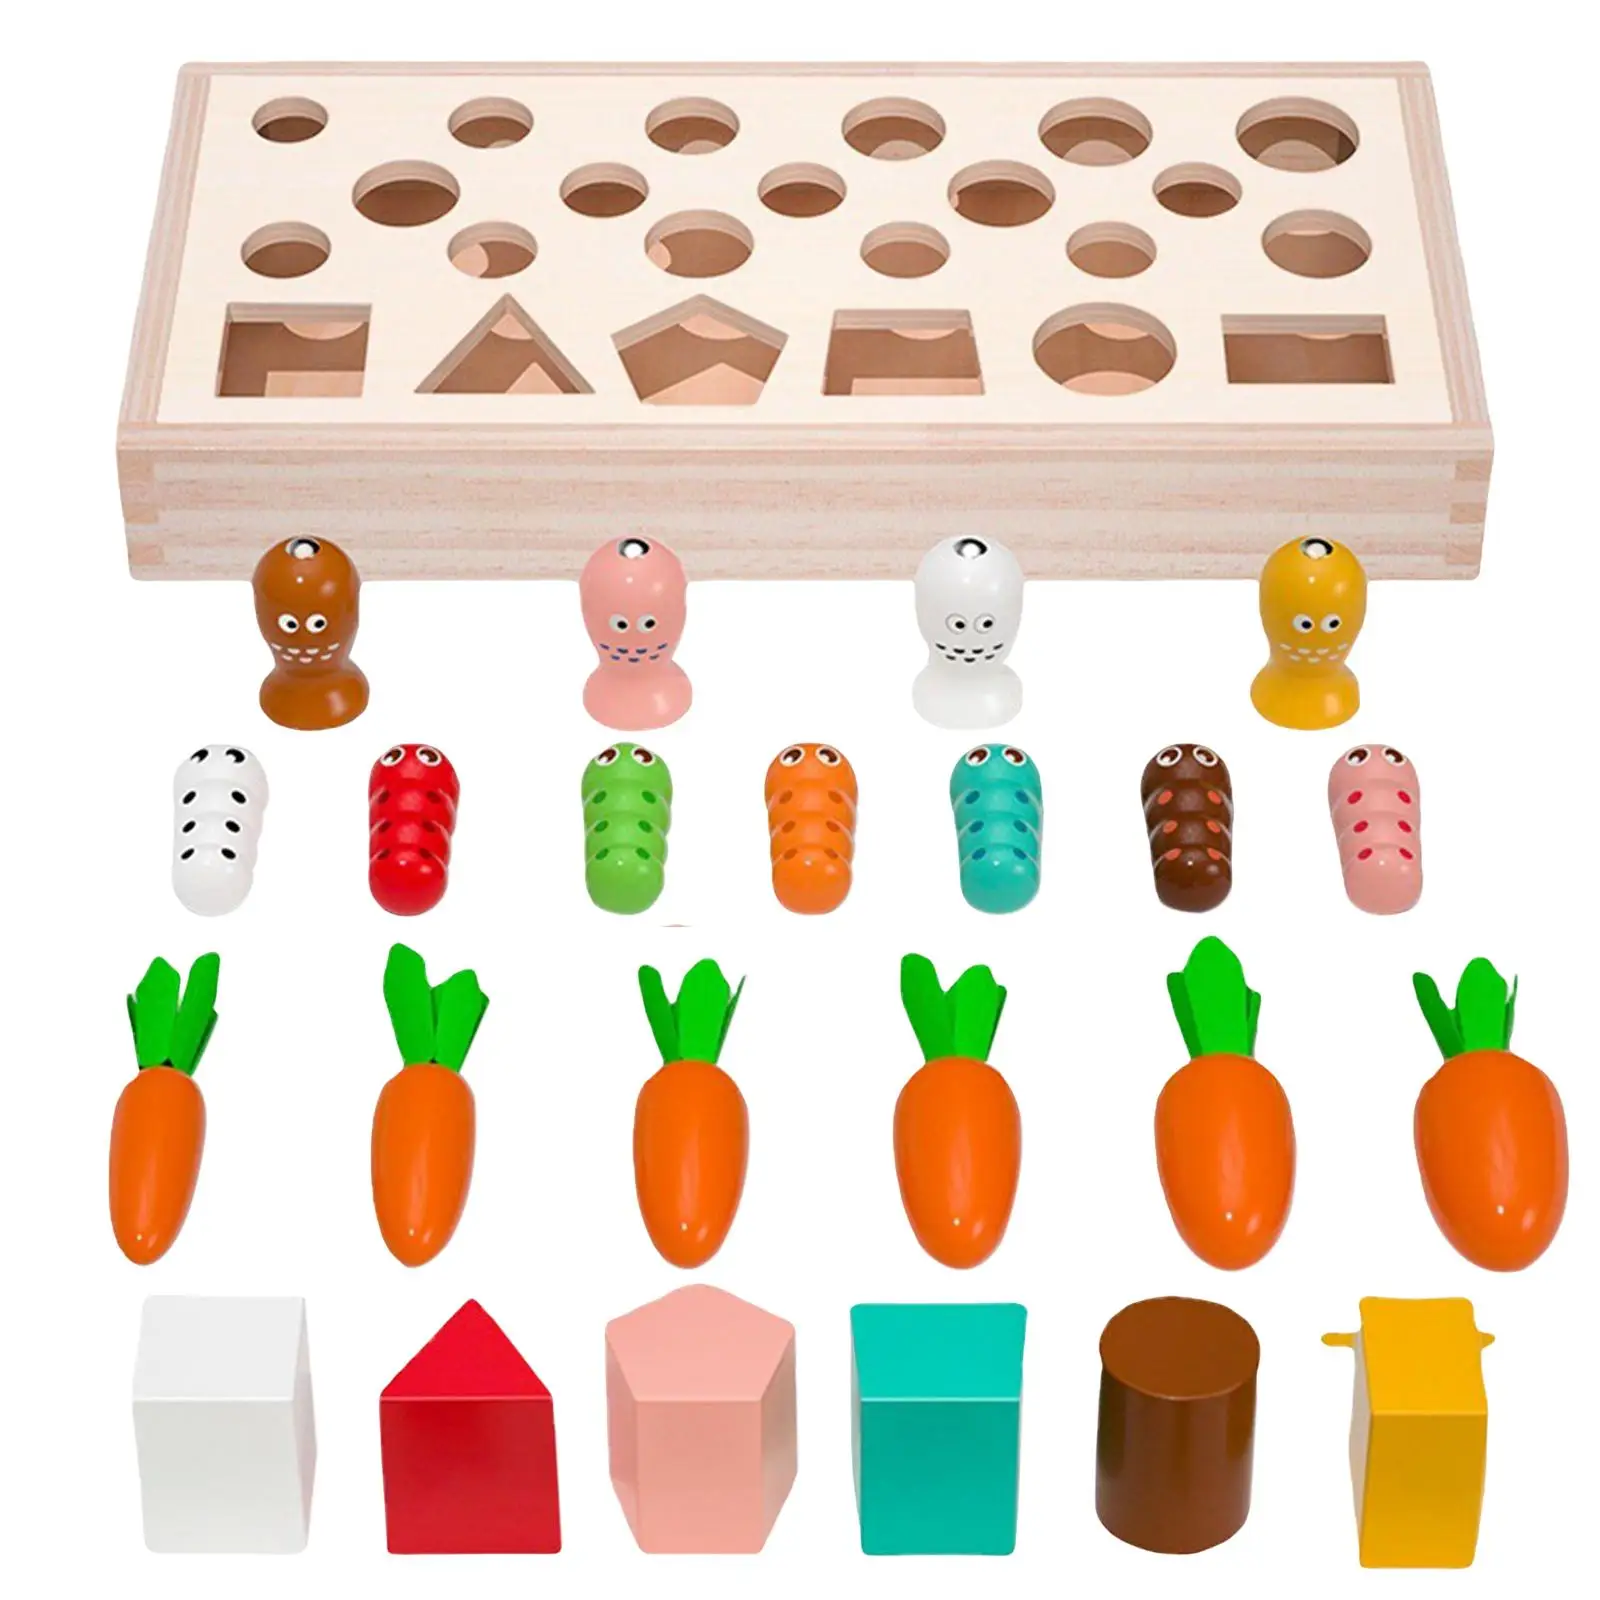 Kids Montessori Wooden Toys Catching Insects Pulling Carrot Toy for Children